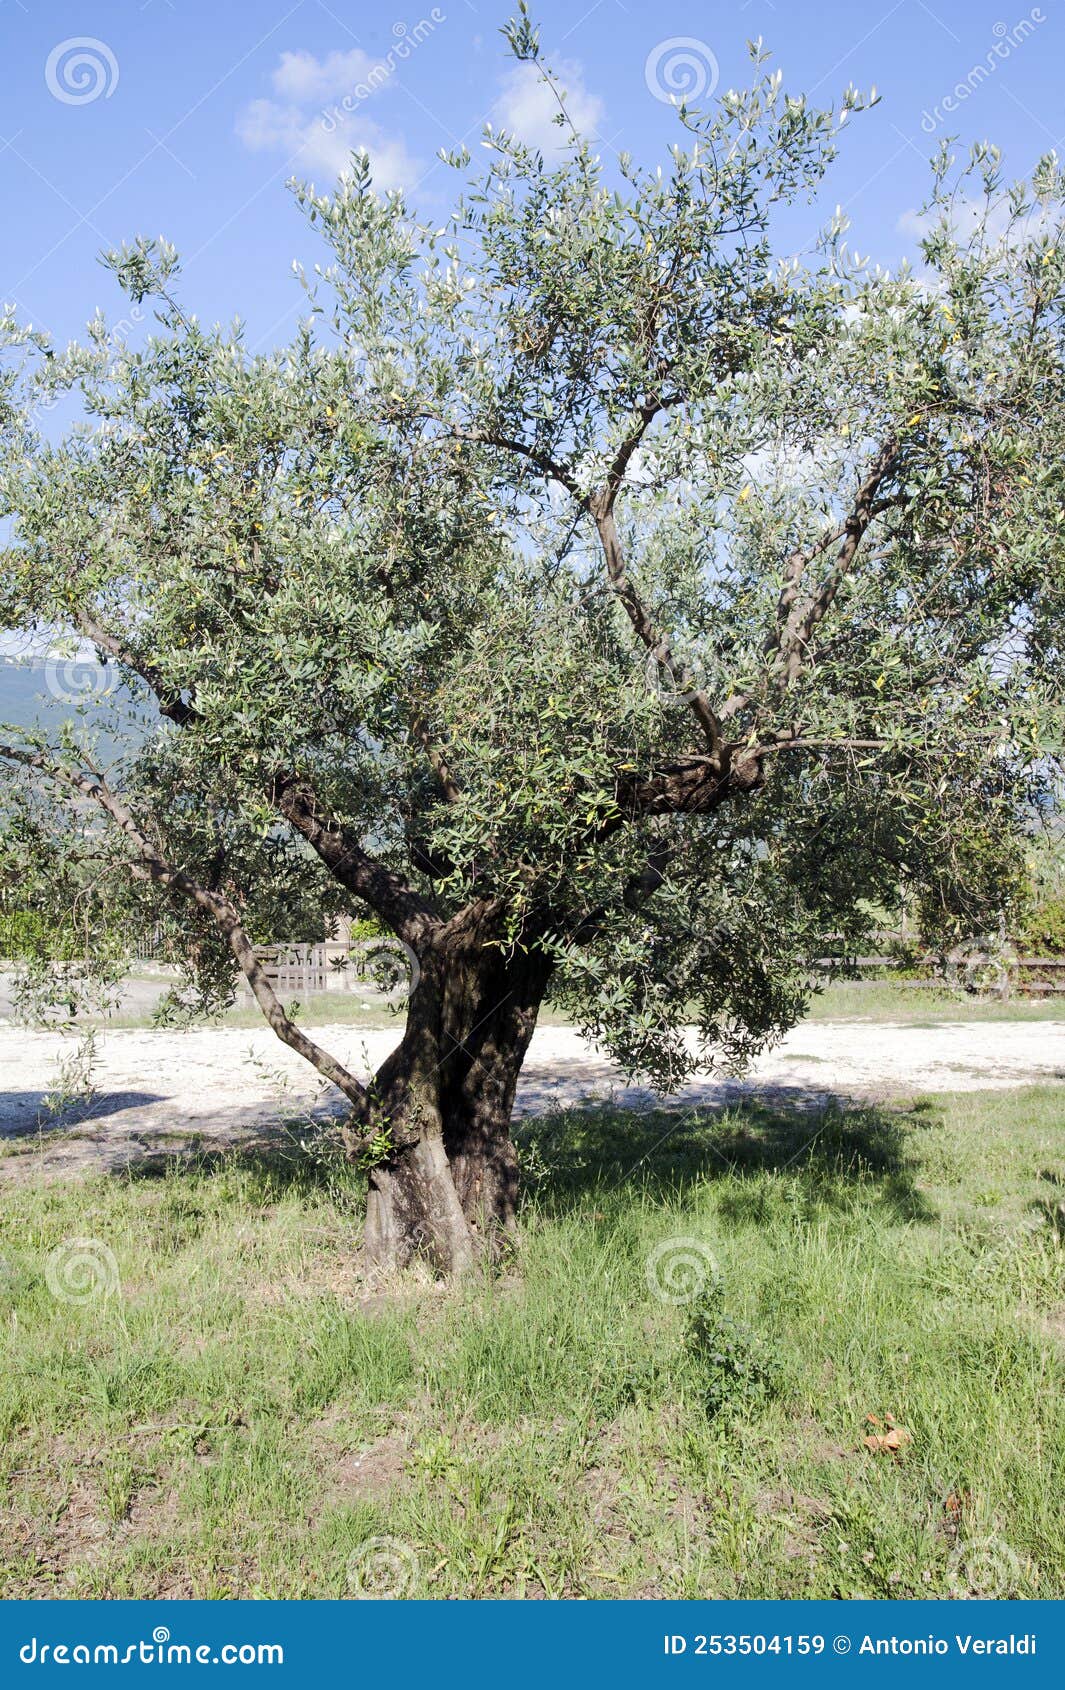 countryside: field with olive trees.